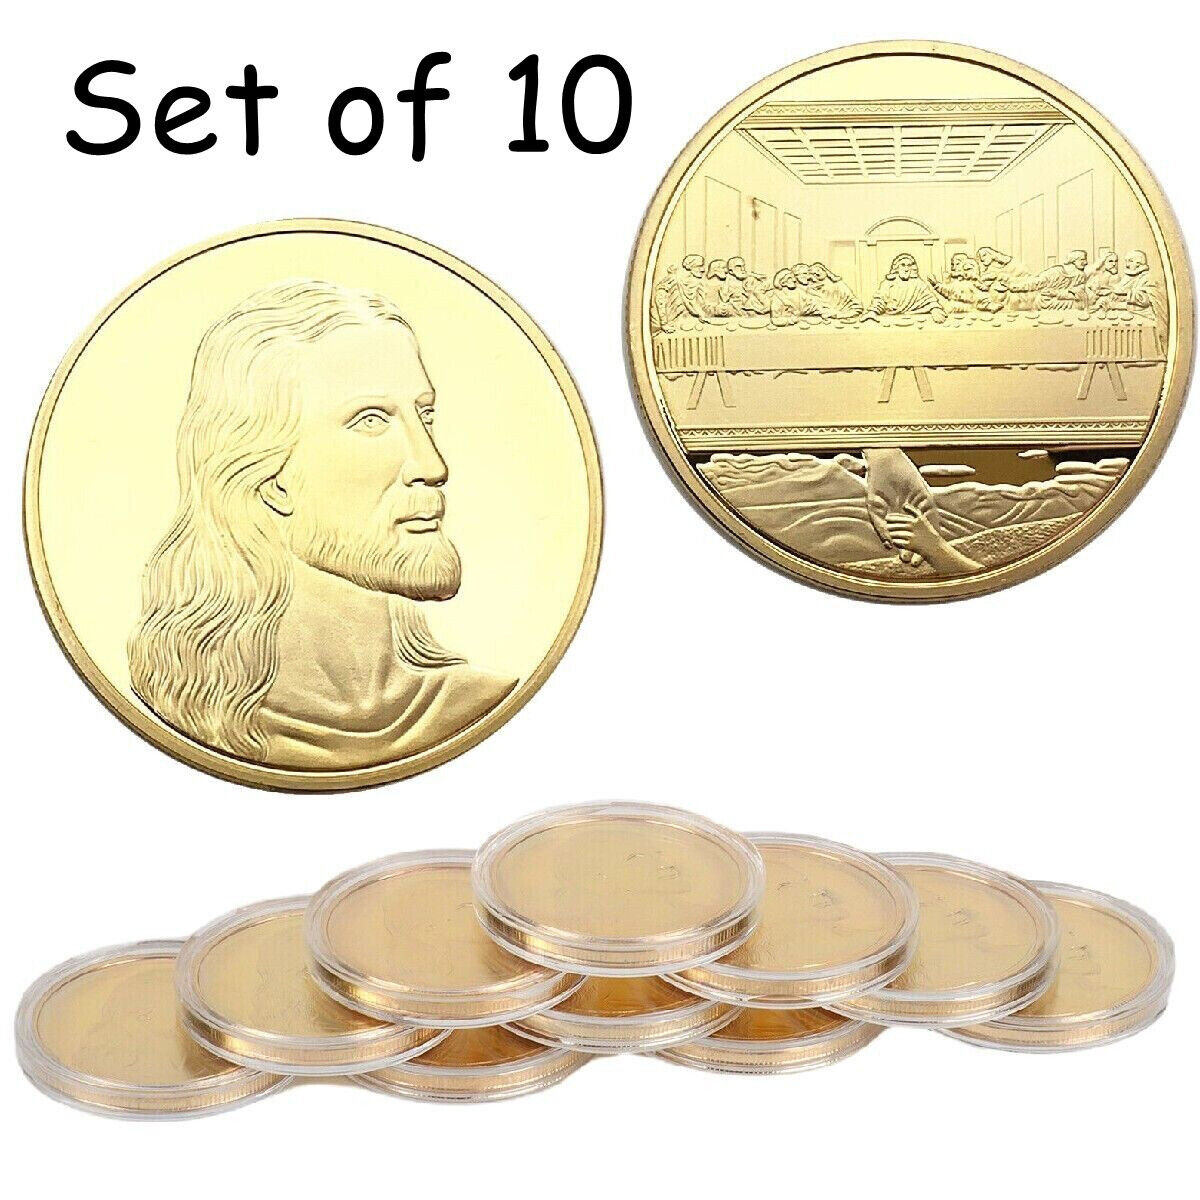 Set of 10 Jesus Memorial Coin Last Supper Gold Plated Metal Coin Souvenir Gift